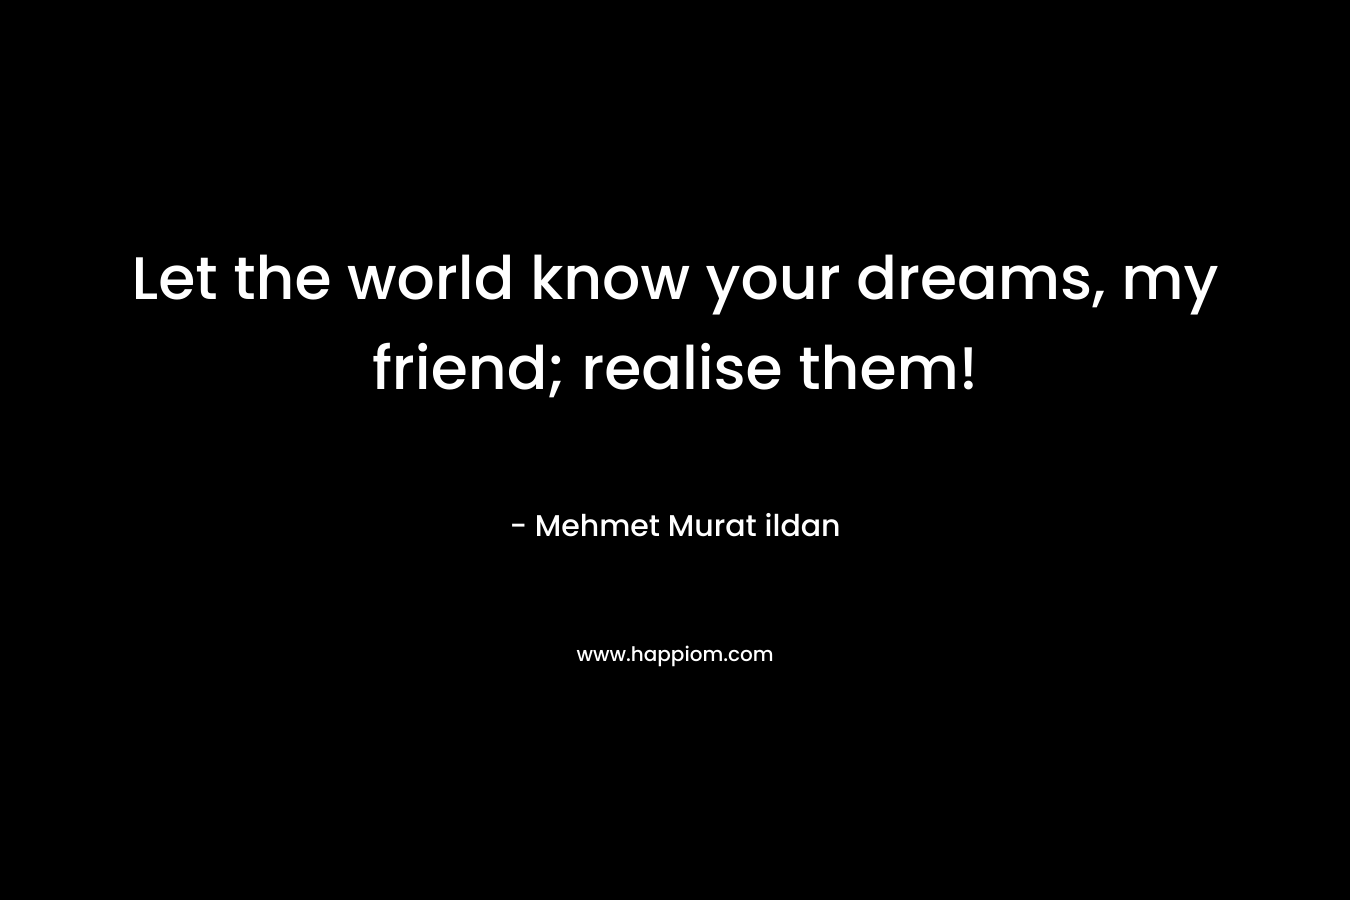 Let the world know your dreams, my friend; realise them!